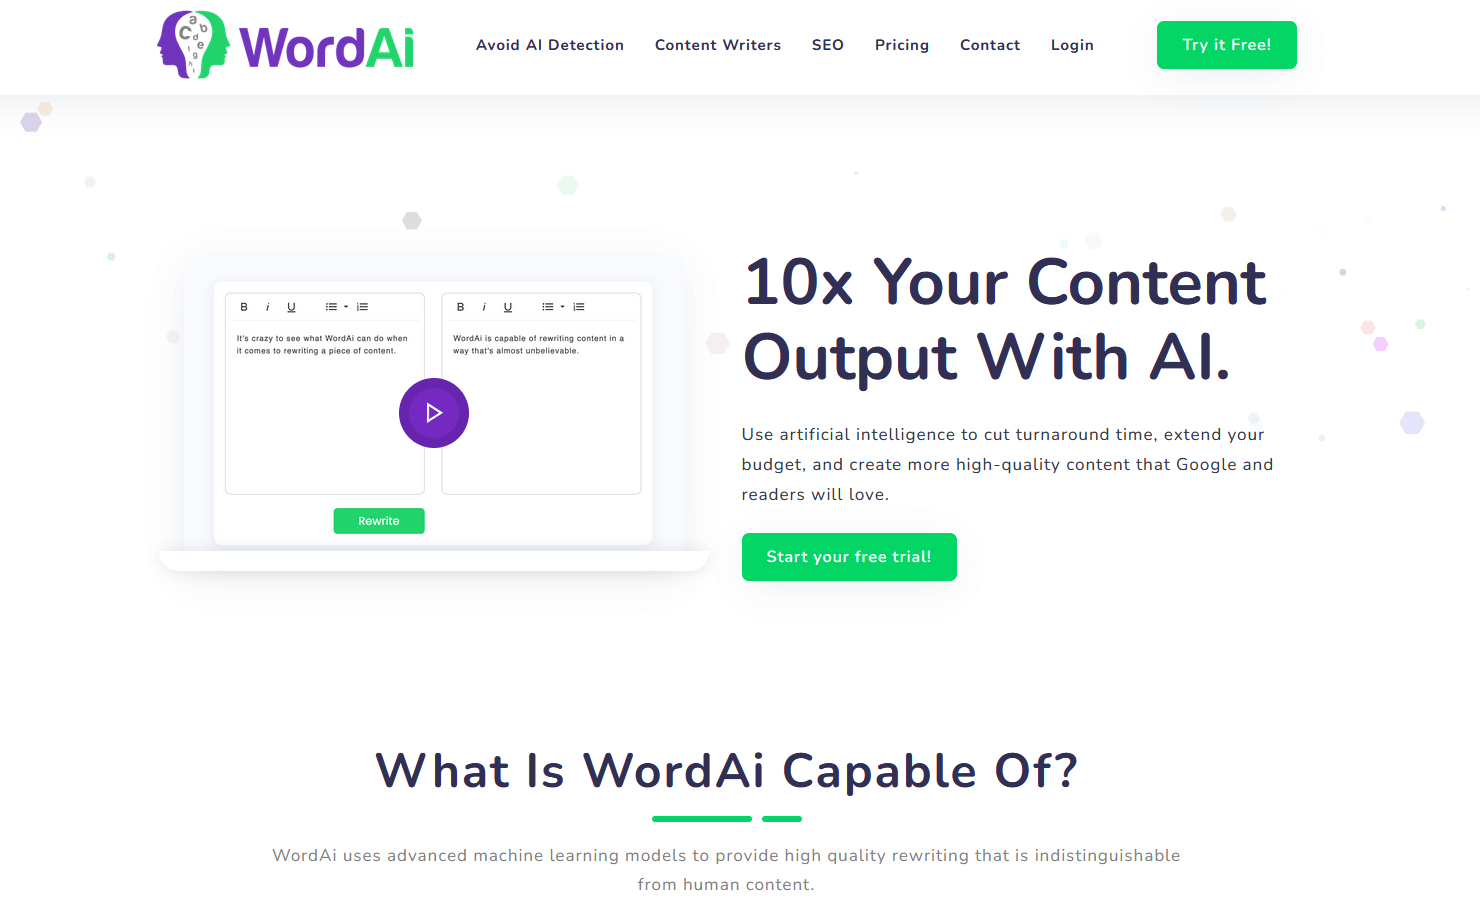 WordAI offers up to 1100 rewrite versions per paragraph